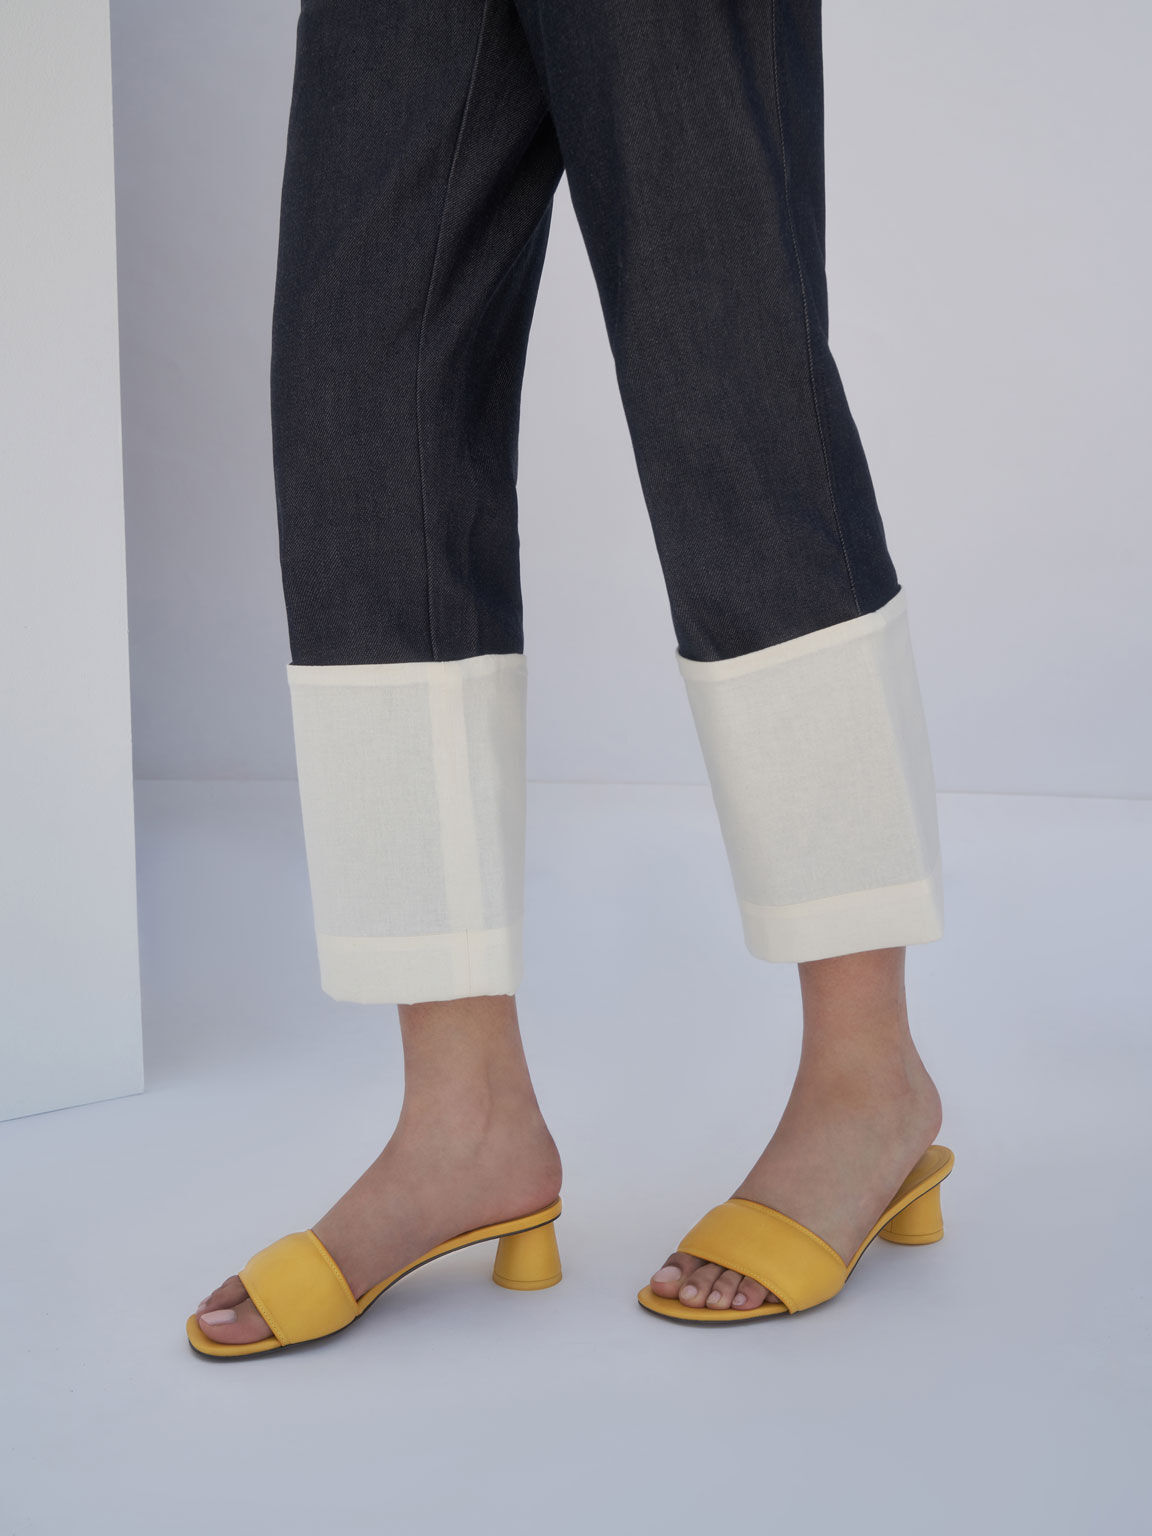 Sandal Puffy Cylindrical Heel Mules, Mustard, hi-res